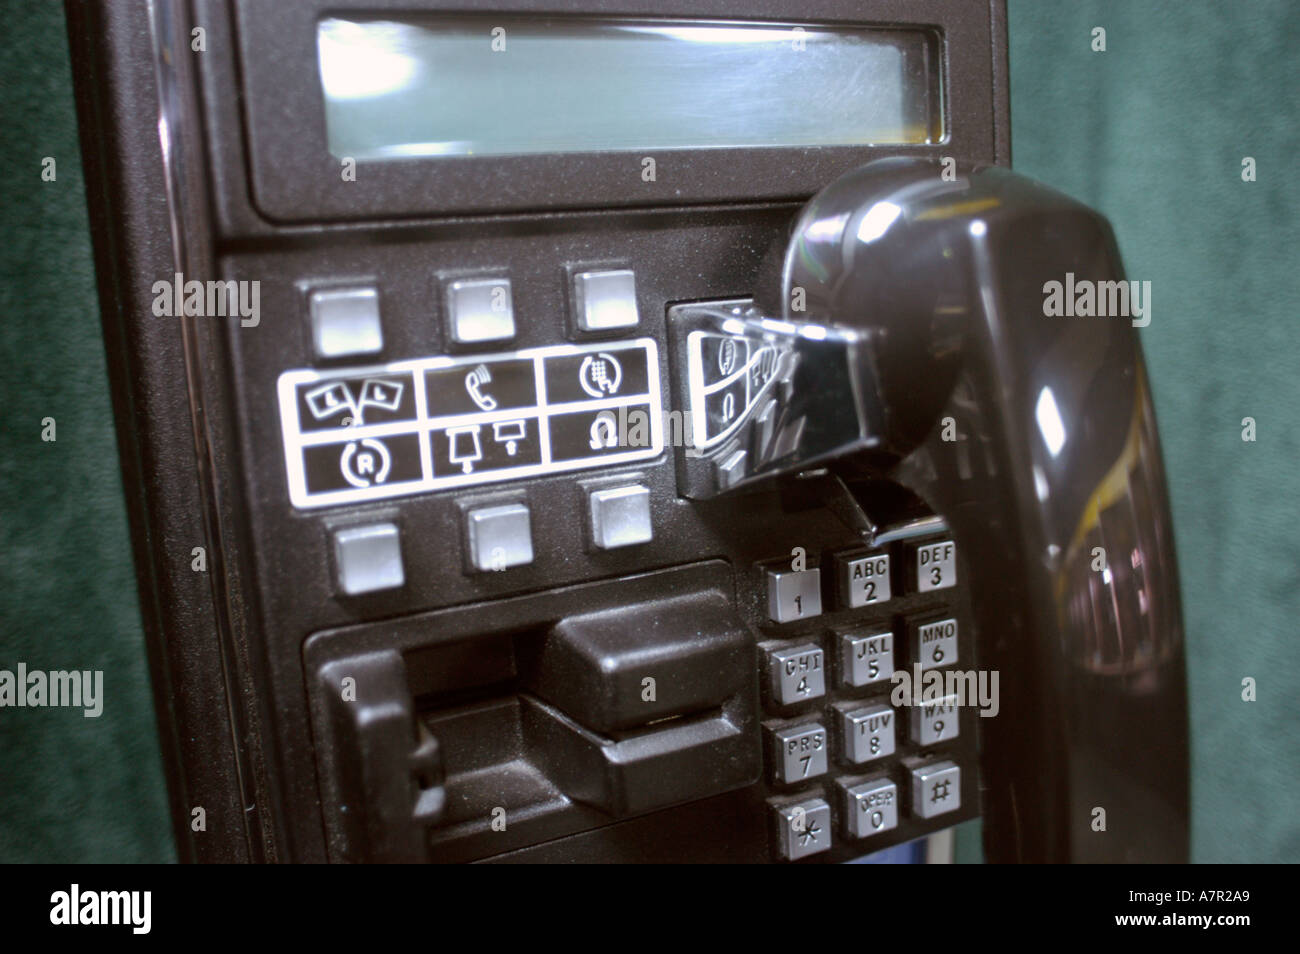 out dated push button phones with card slot for international contacts Stock Photo